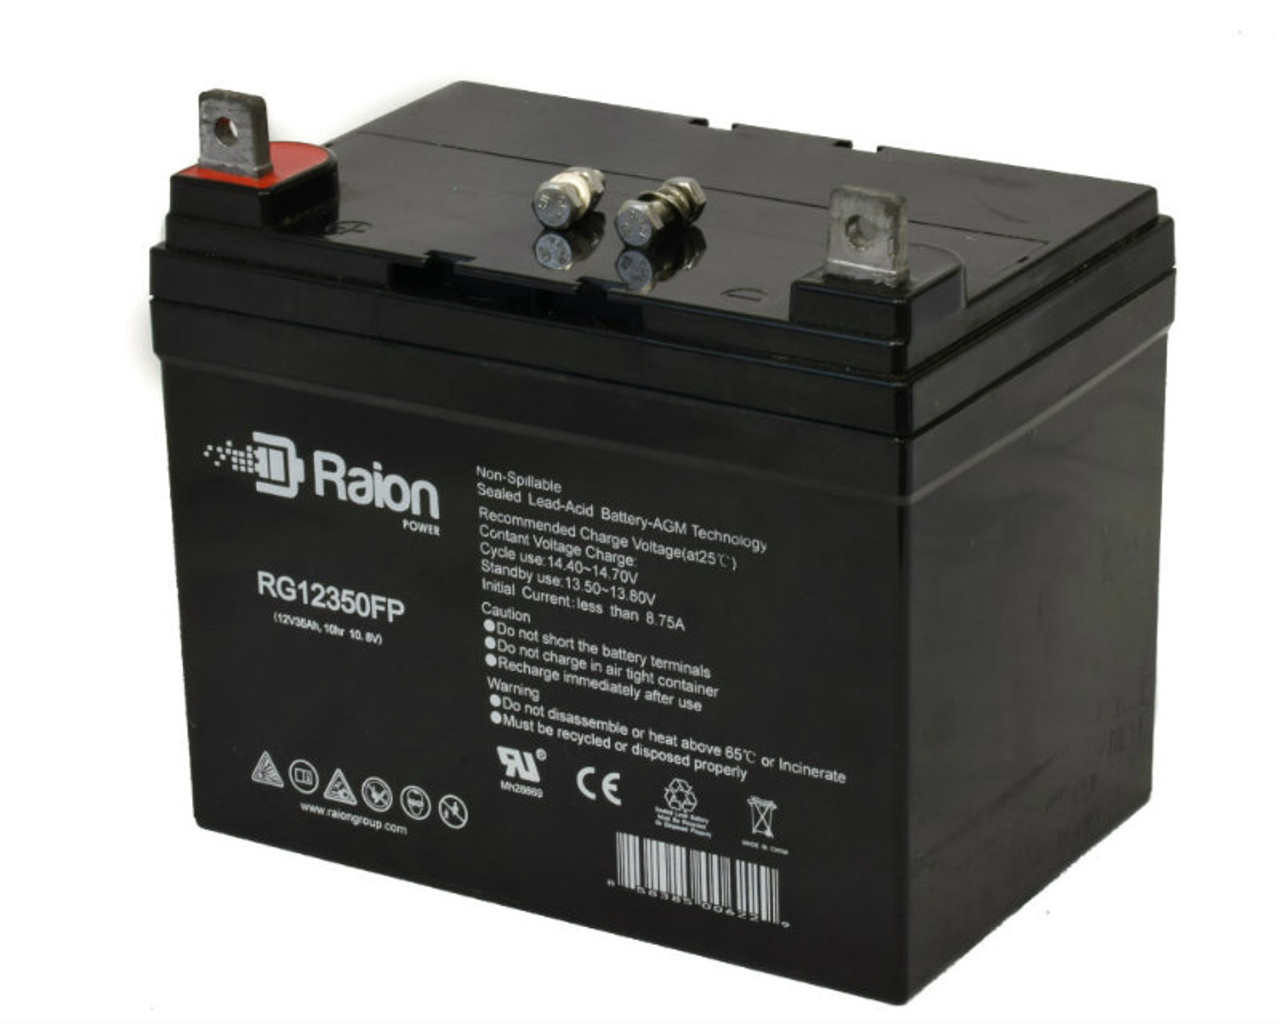 Raion Power Replacement 12V 35Ah RG12350FP Battery for Douglas DBG12-32JH